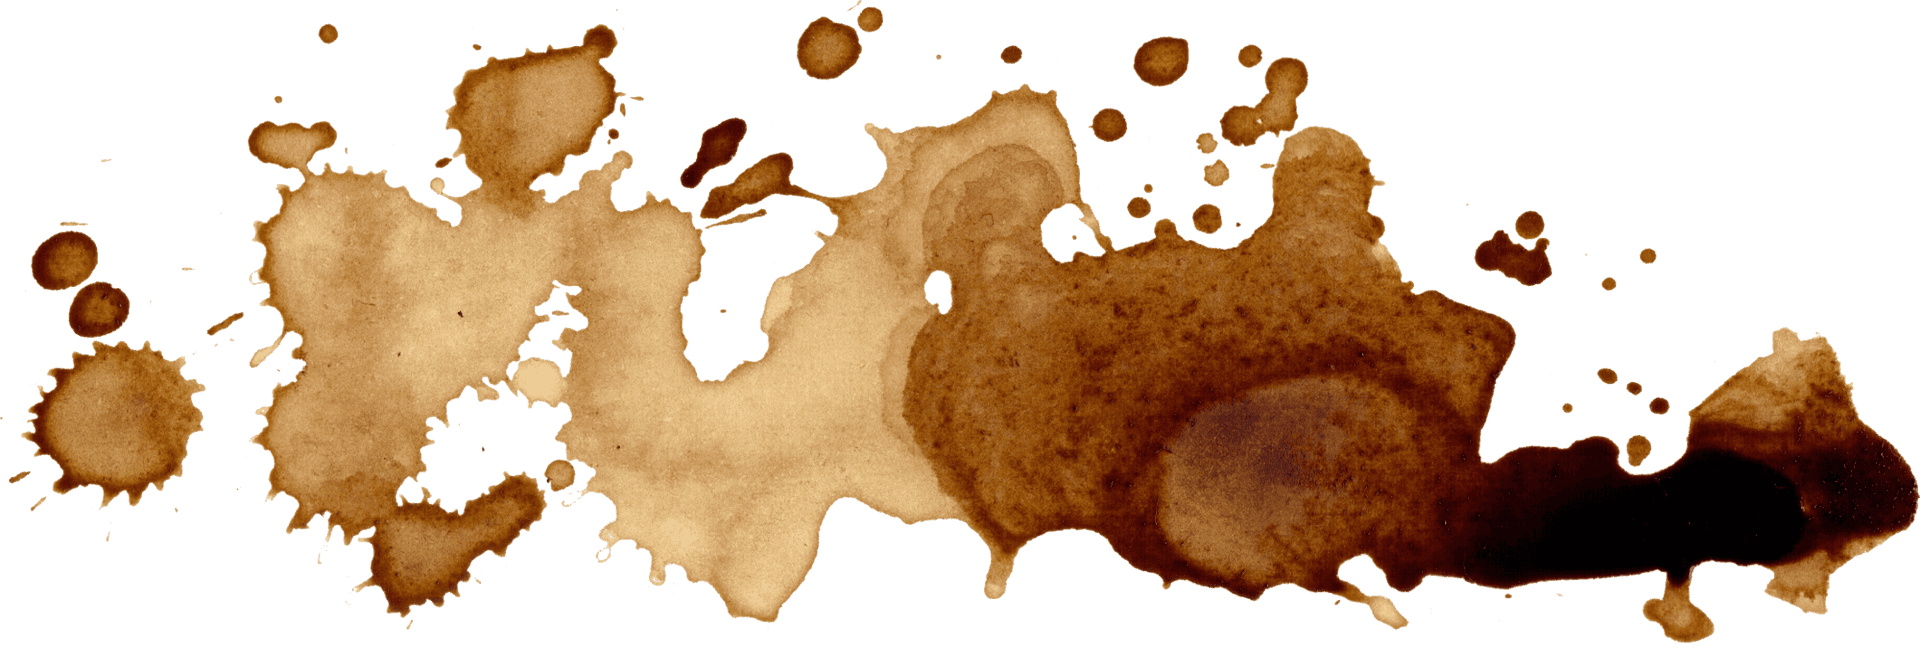 Coffee Stain Splatter Texture PNG